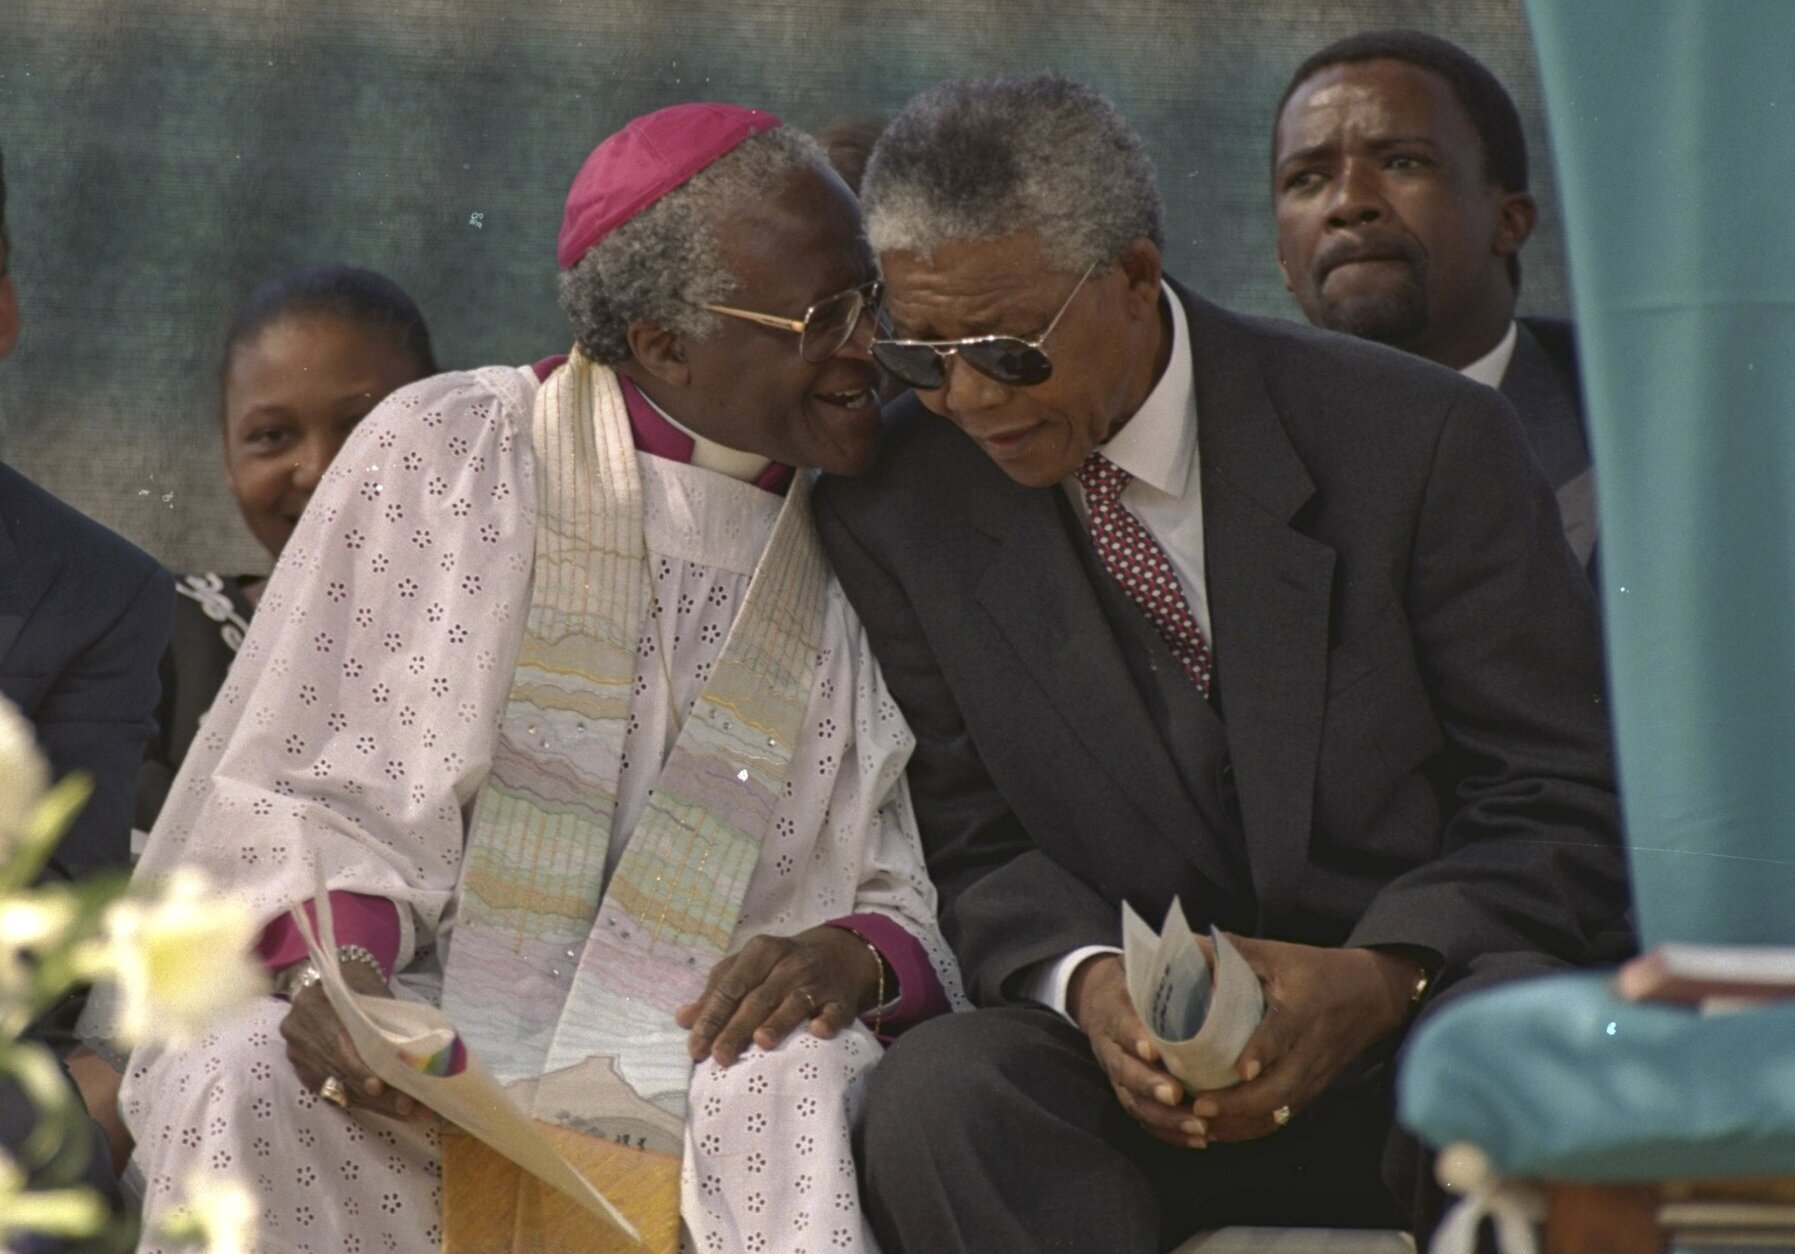 <p>Tutu (left) and South Africa&#8217;s then-president-elect, Nelson Mandela, talk during celebrations in Soweto, South Africa, in this 1994 file photo.</p>
